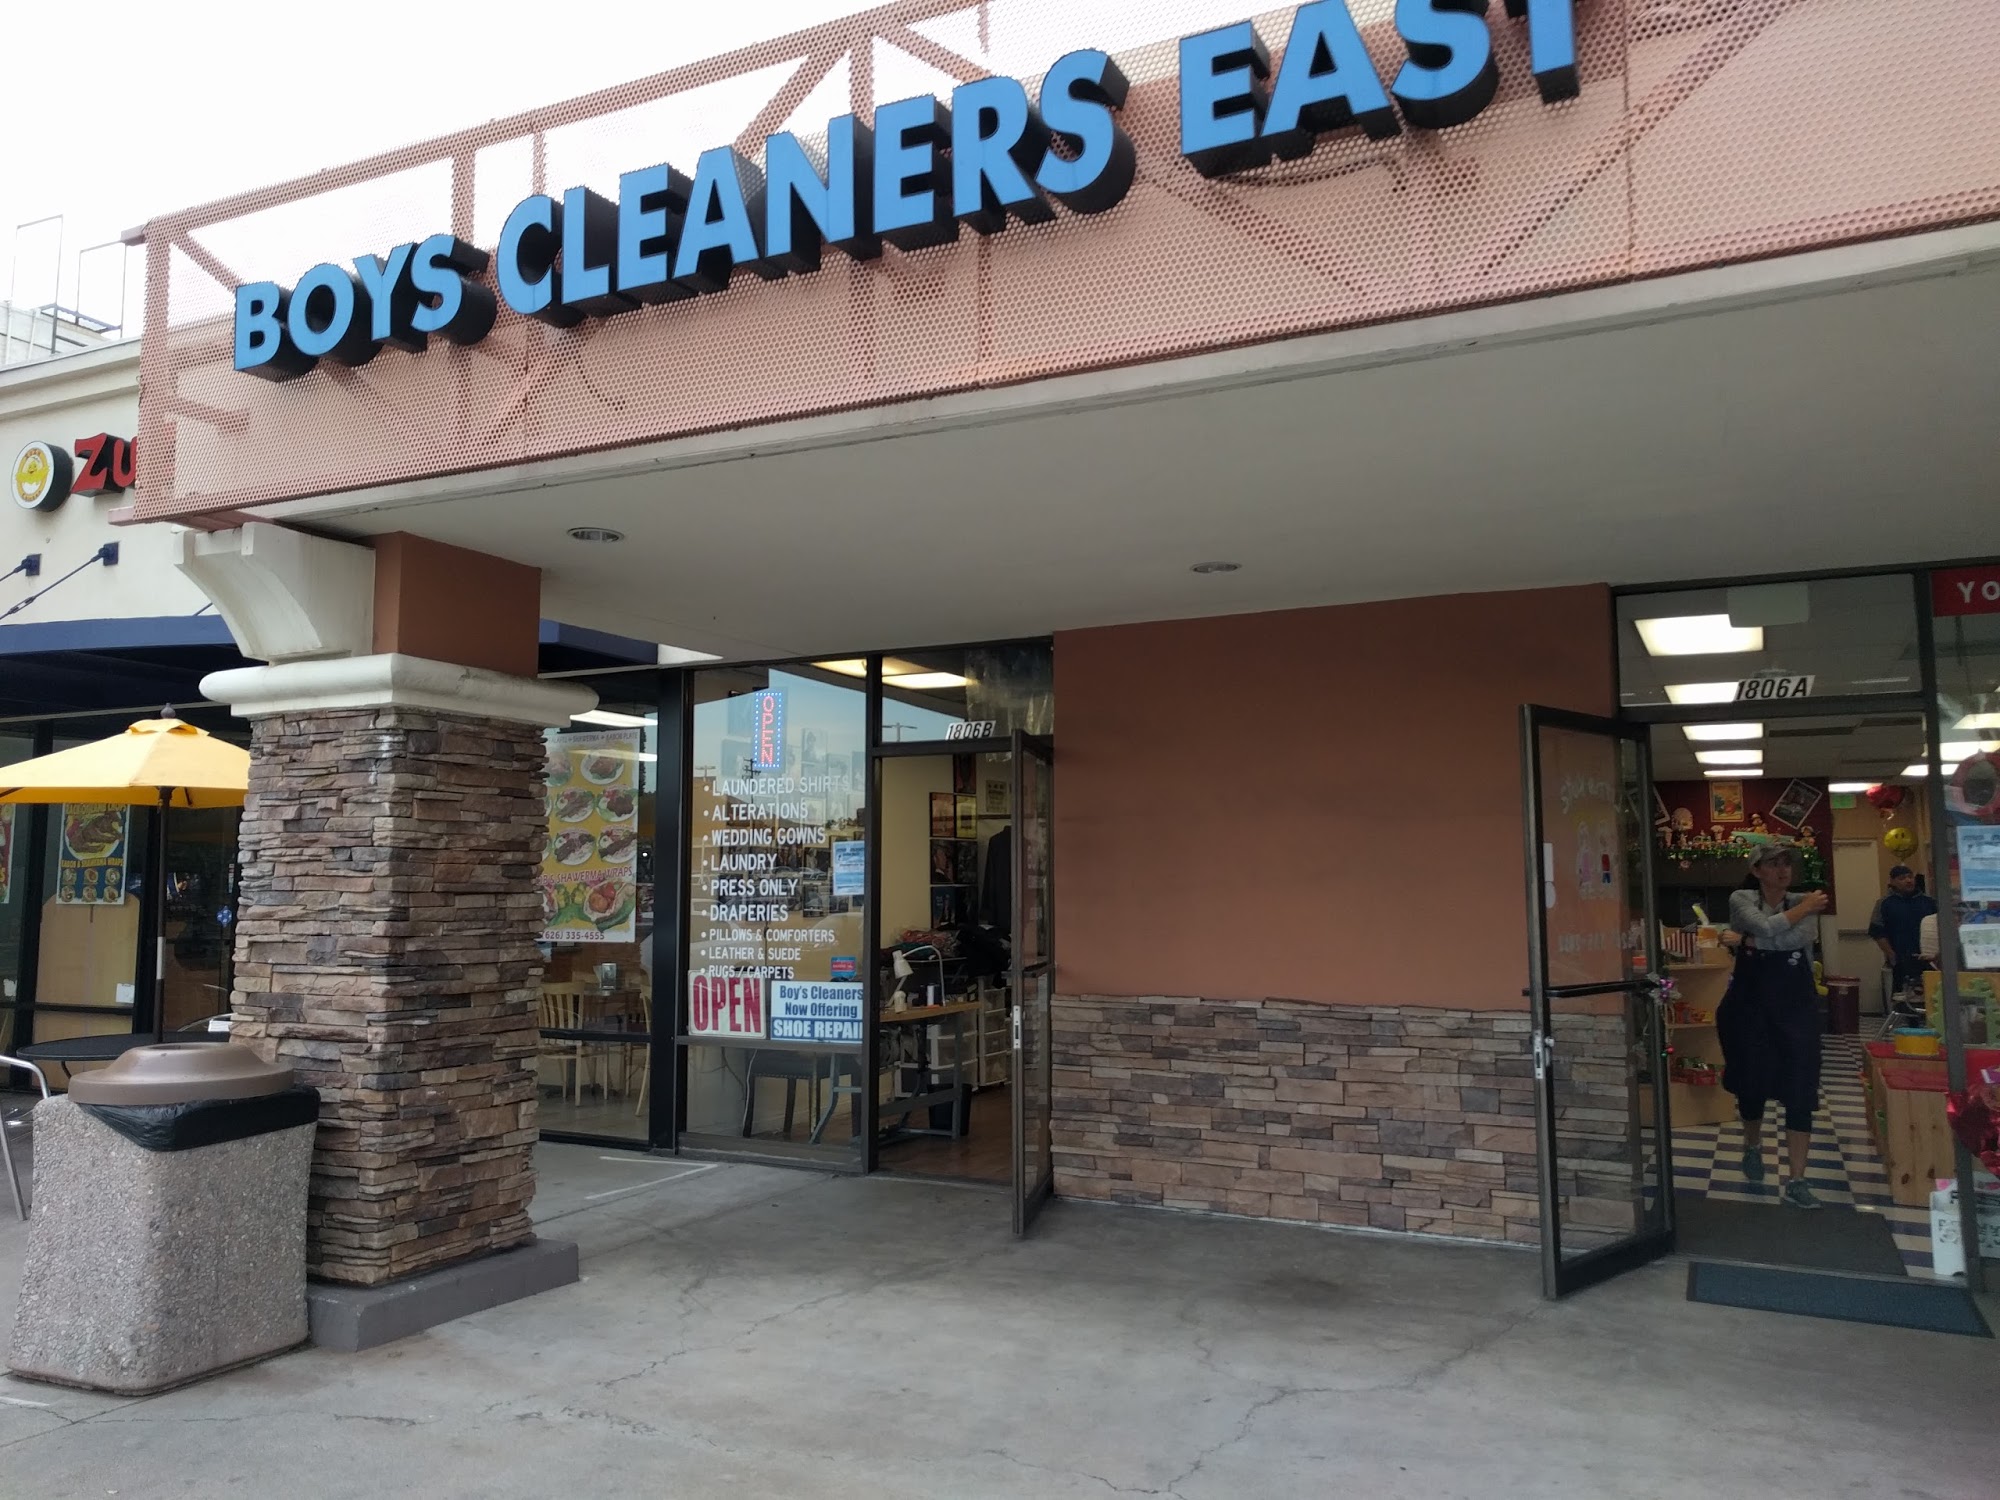 Boy's Cleaners East